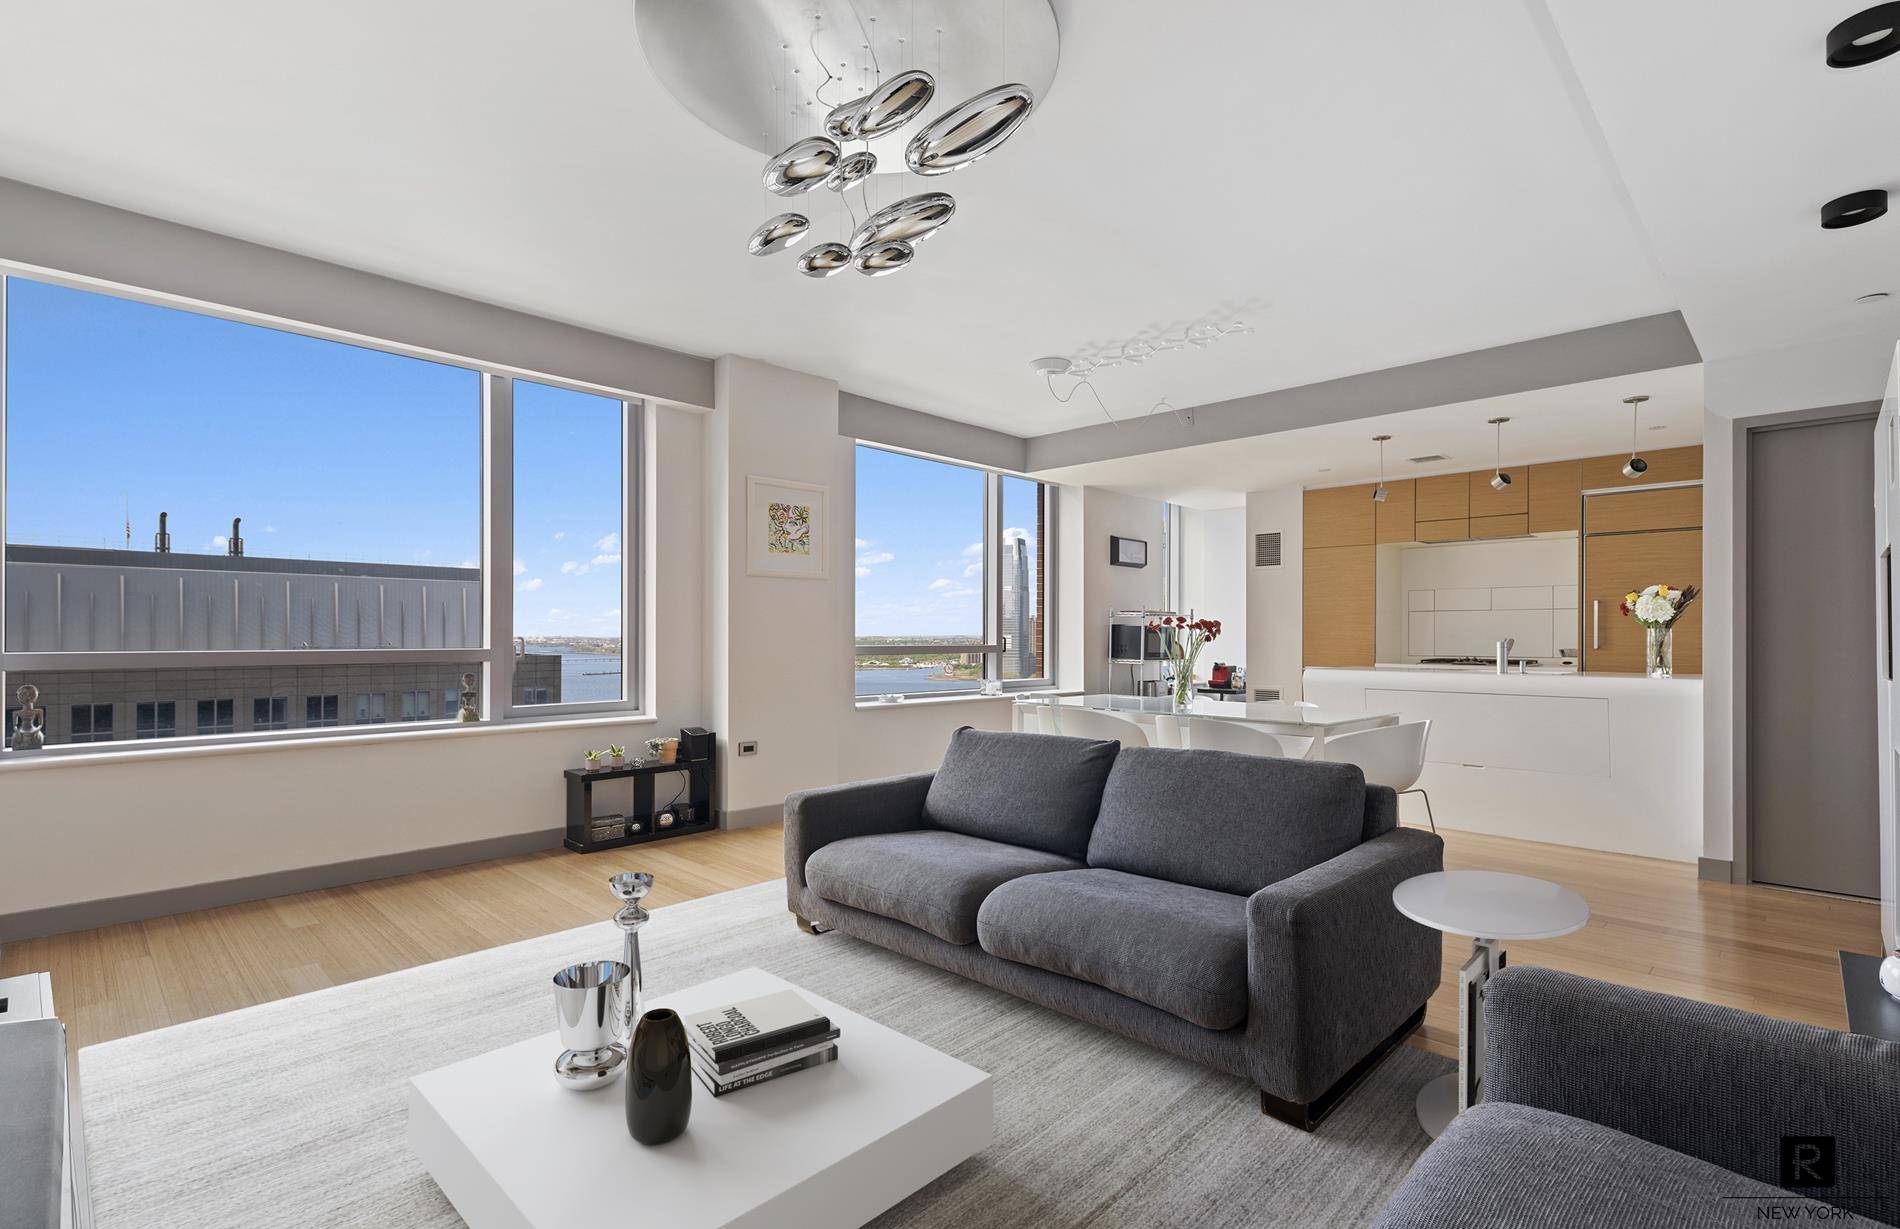 Townhouse living with river views in the Riverhouse, the only LEED Gold Green condominium in North Battery Park West Tribeca.